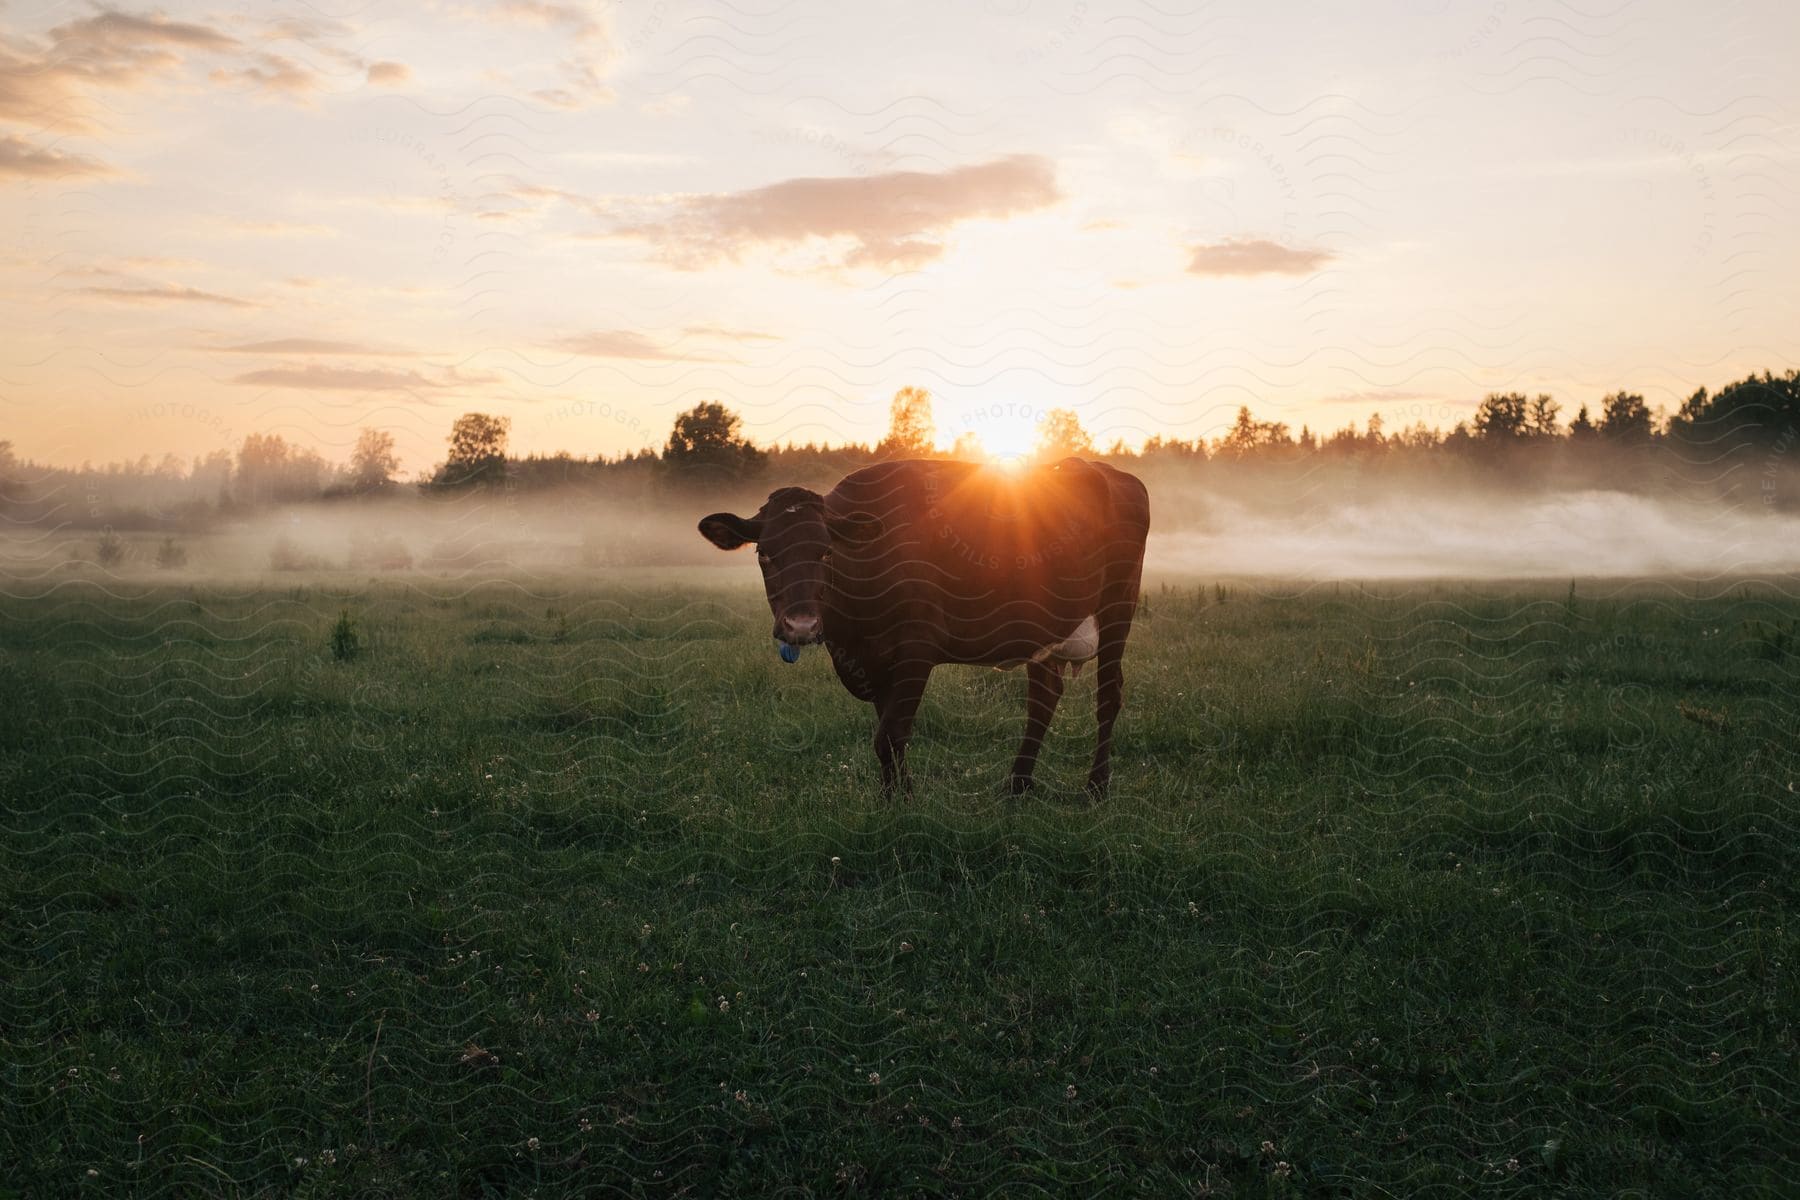 A dairy cow grazing on a grassland at sunrise with low fog in the background